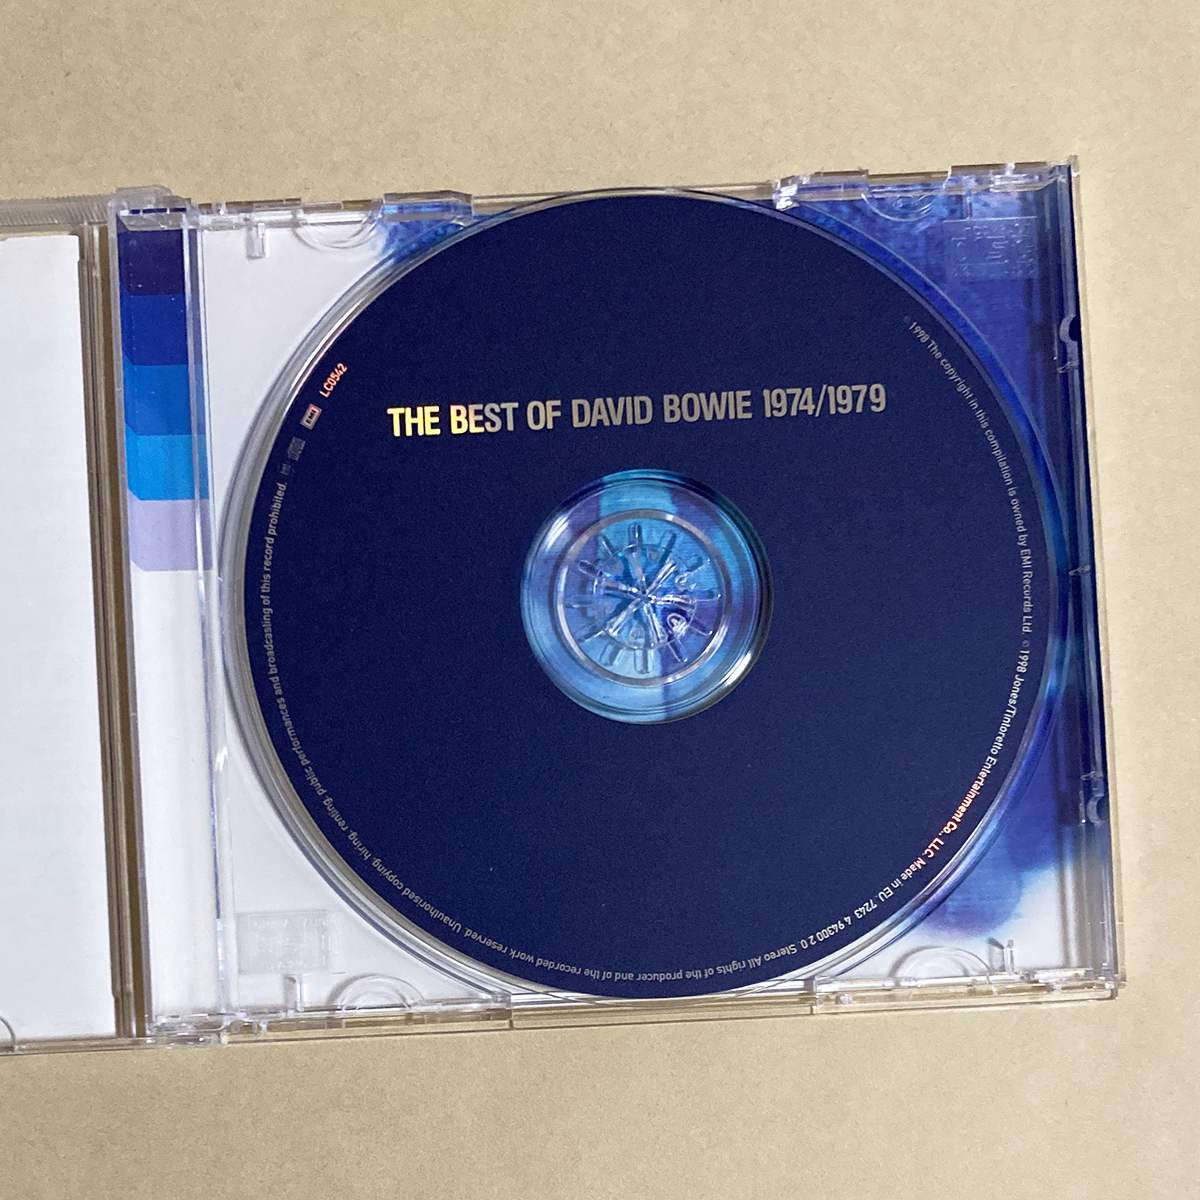 David Bowie / Best Of David Bowie 1974-1979［輸入盤CD］ デヴィッド・ボウイ_画像3